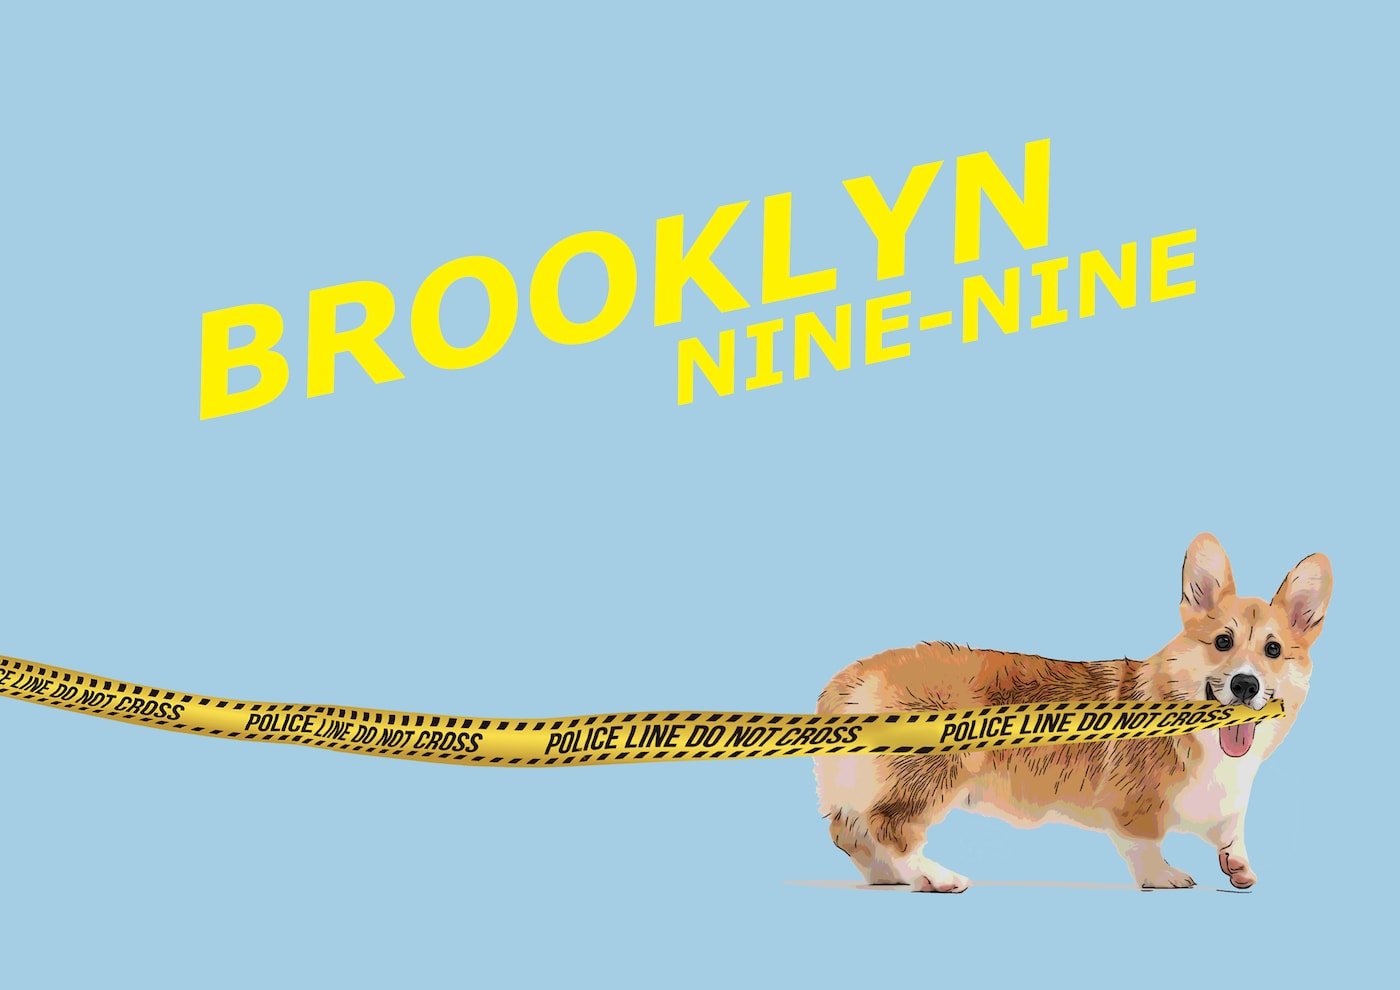 Poster for the show. A corgi is holding on to police tape